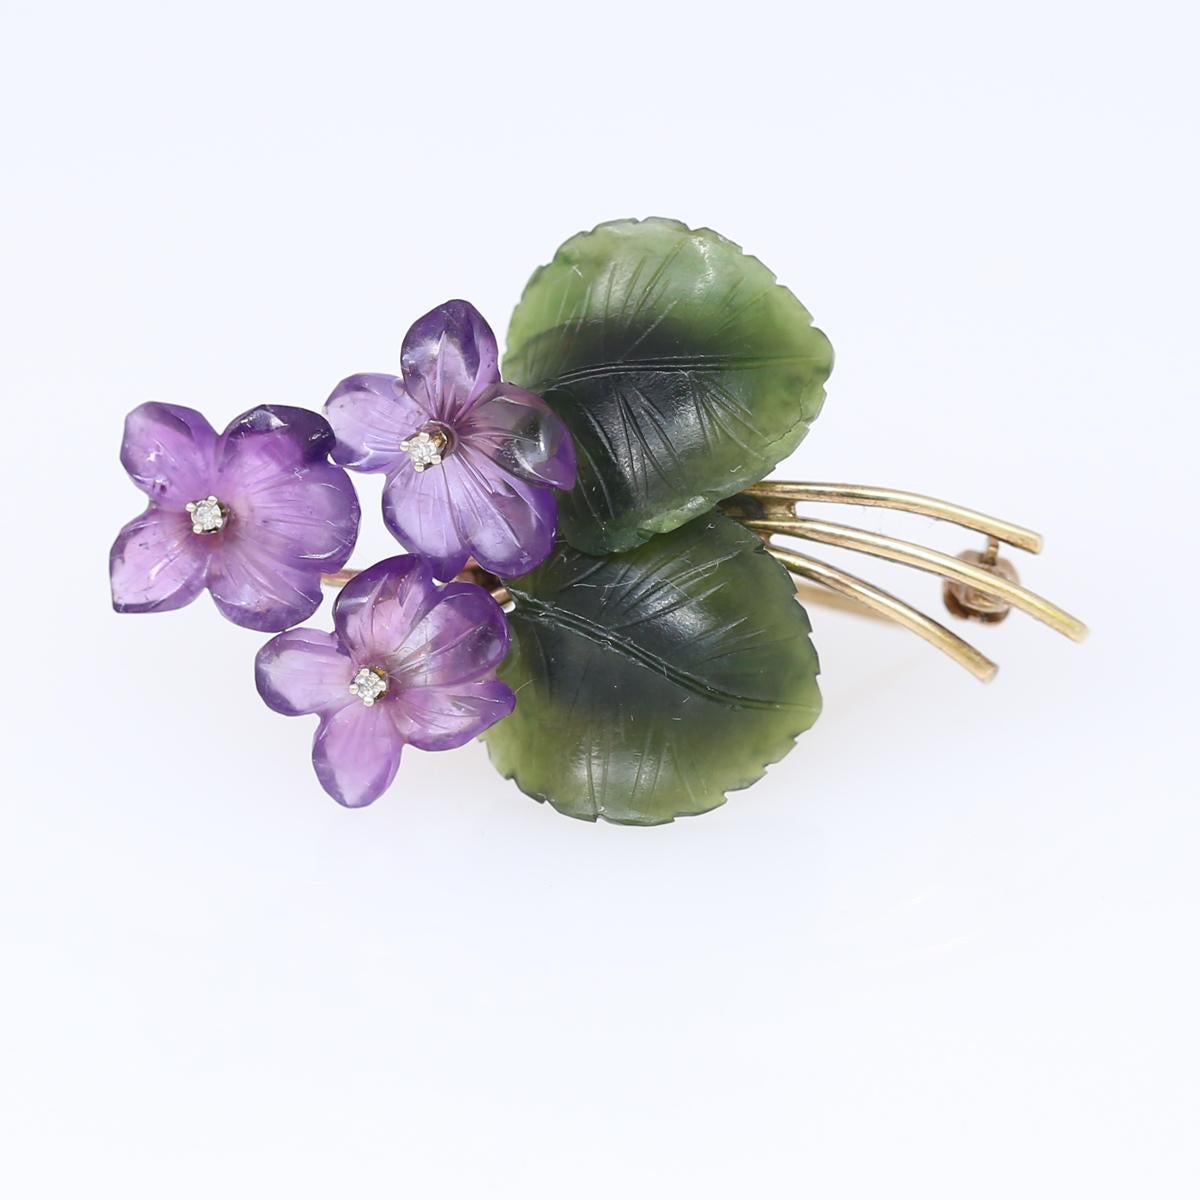 Violet flowers brooch comprising: Amethyst, Jade (jadeite) and Diamonds. Yellow gold. Three engraved amethyst flowers with a green leaf made of jadeite. In the centre of the flower, there is fine white Diamond. 
Once it was common to communicate a